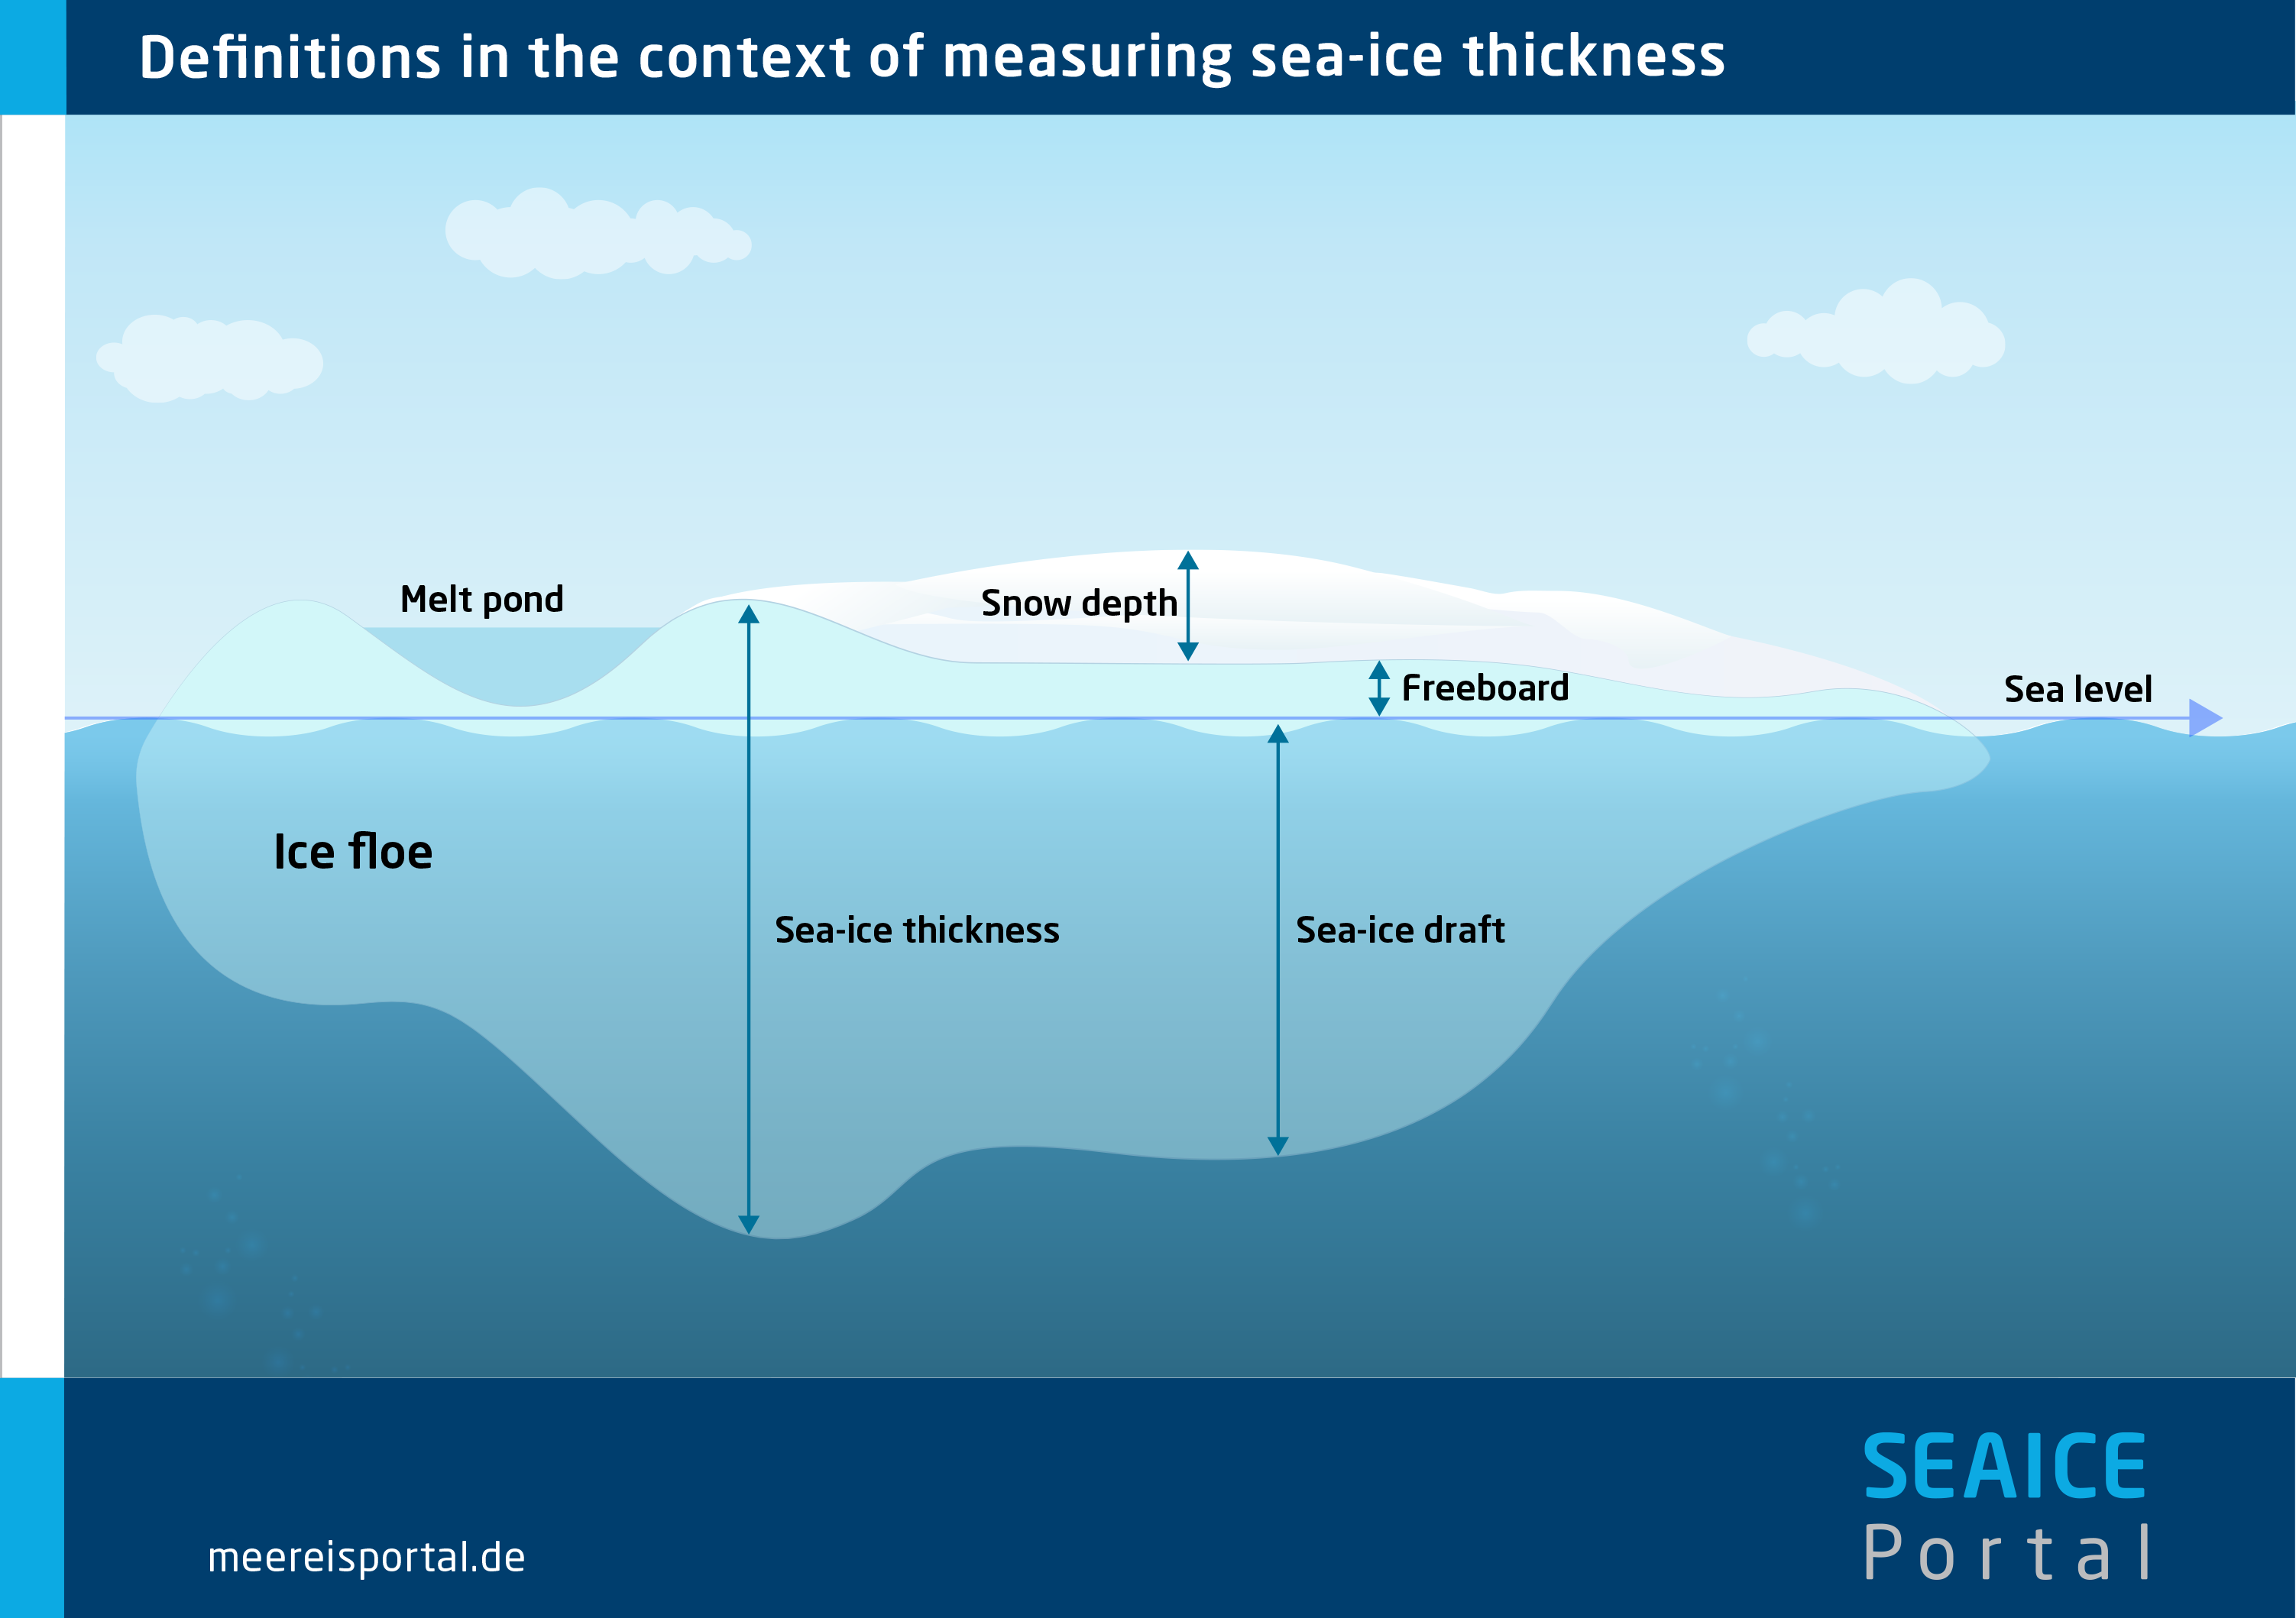 Definitions in the context of measuring sea-ice thickness.